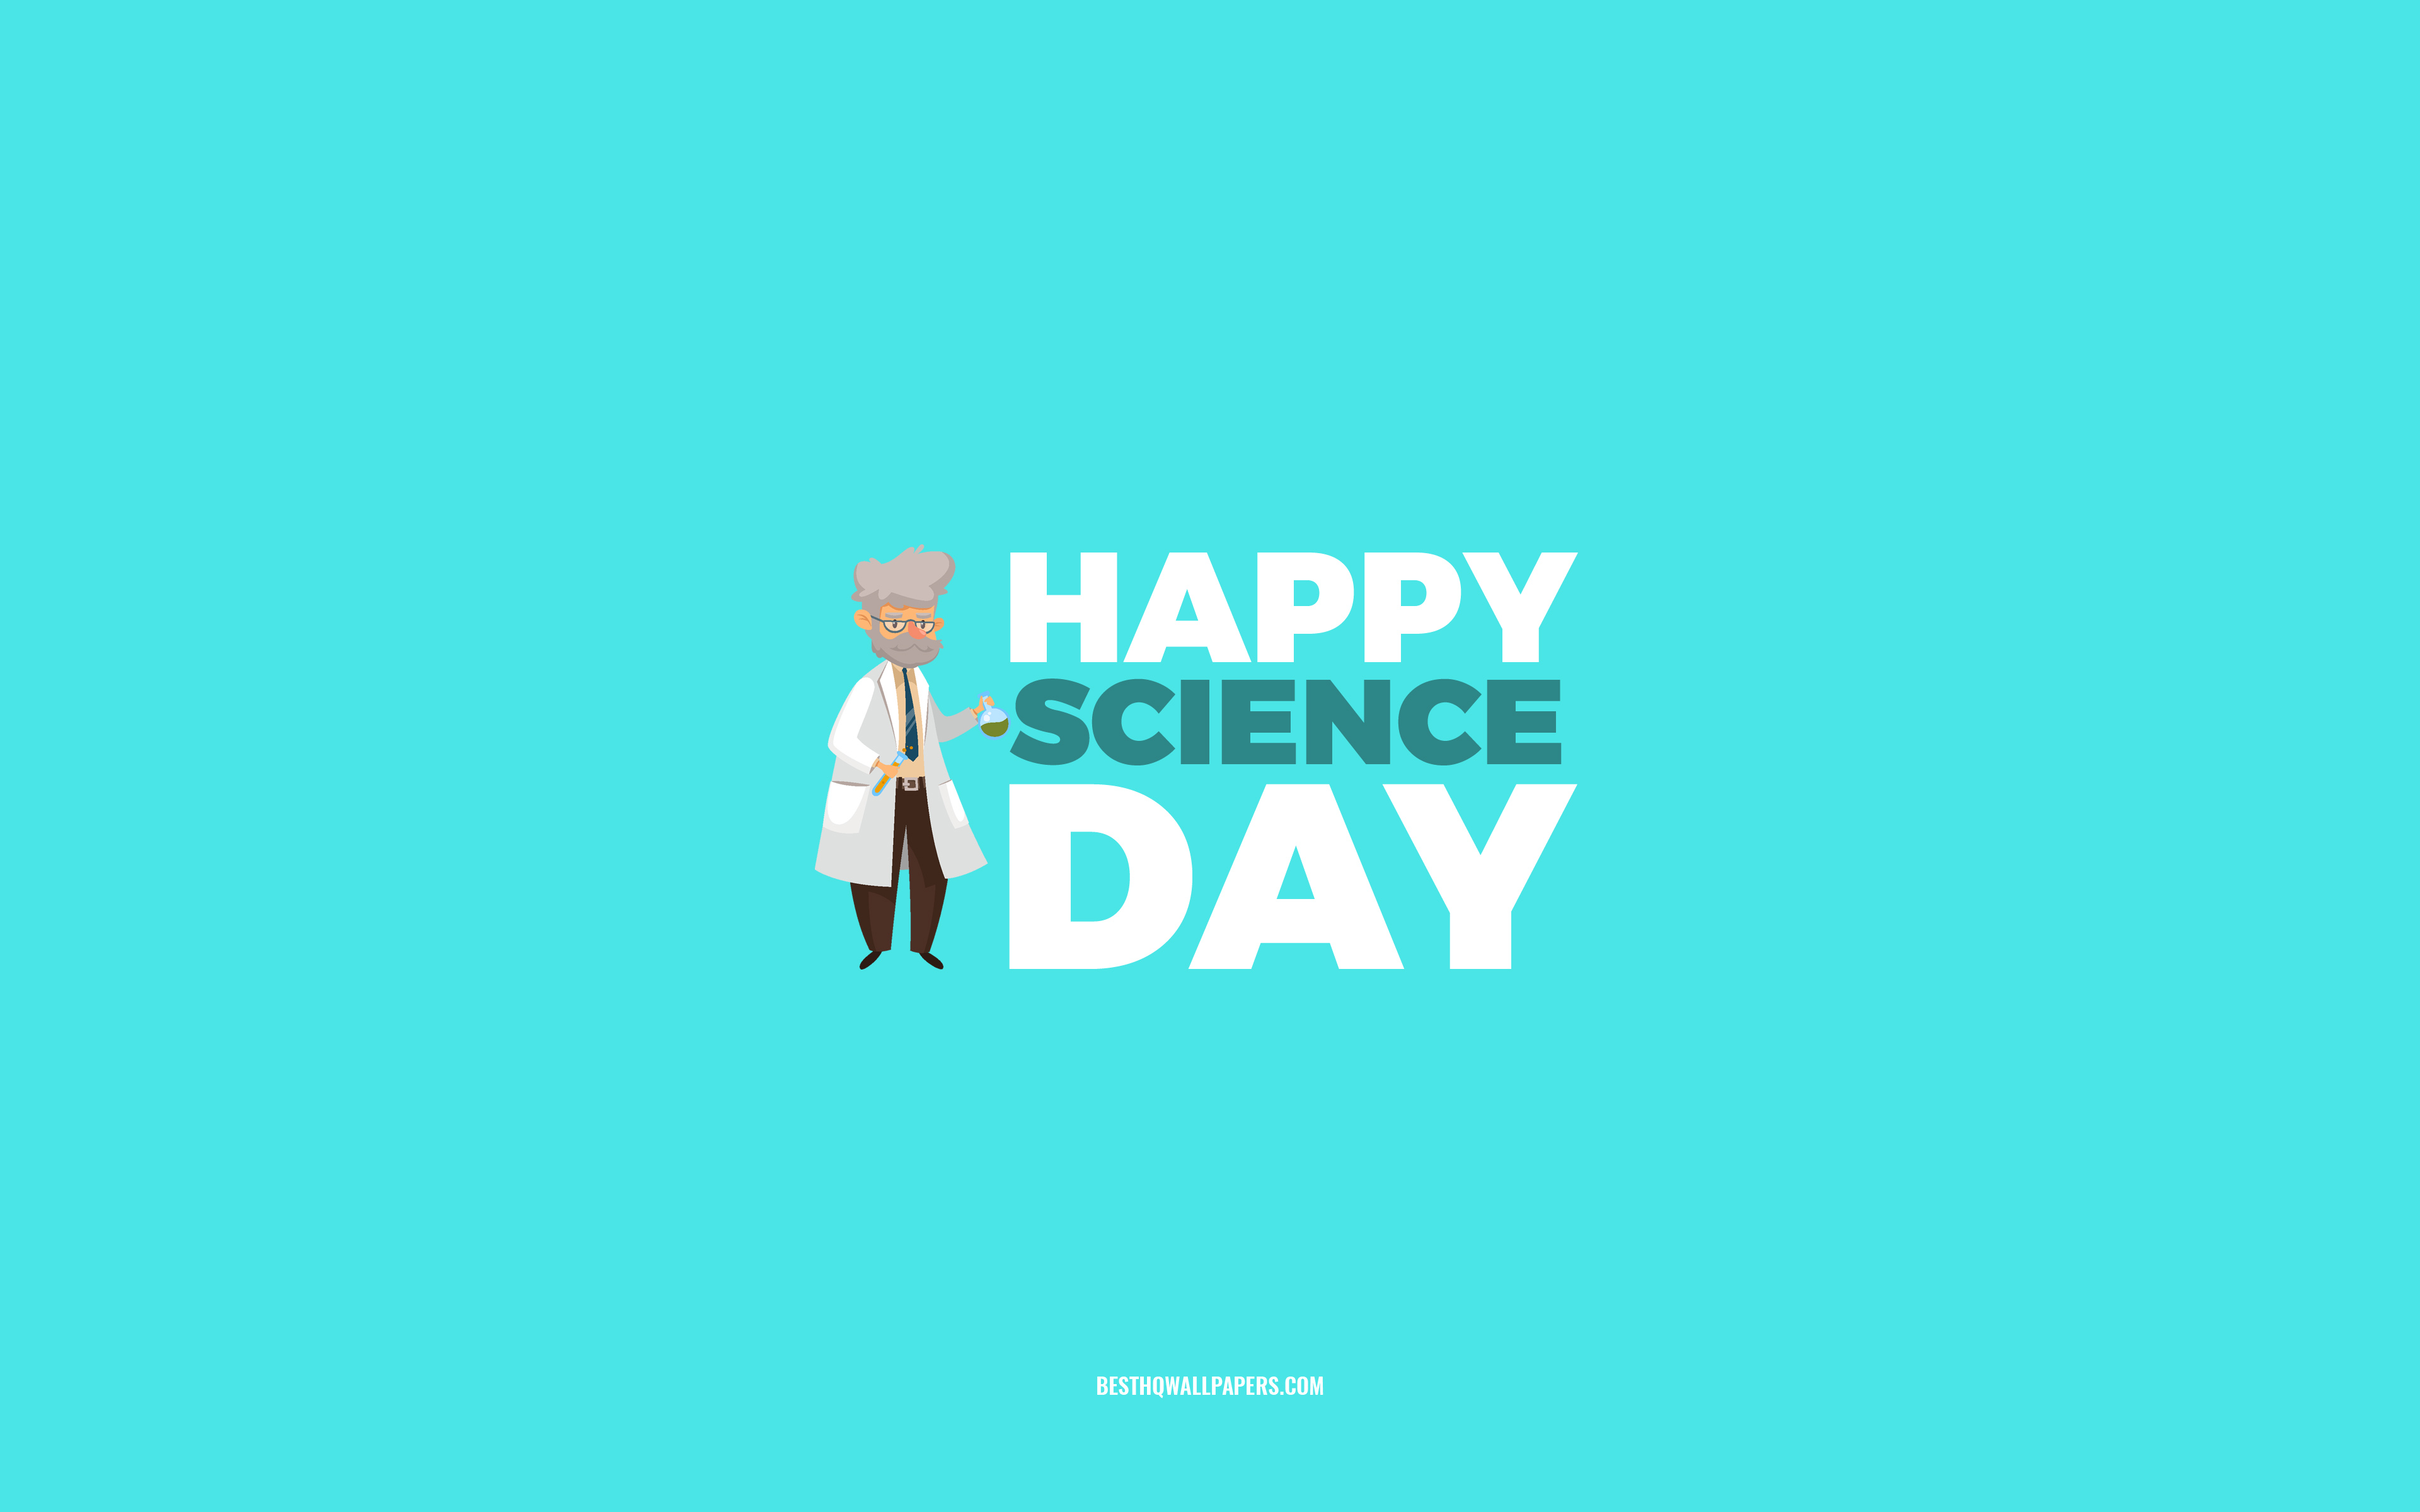 Download wallpaper Happy Science Day, 4k, blue background, Science Day, congratulations, Science, Day of Science for desktop with resolution 3840x2400. High Quality HD picture wallpaper